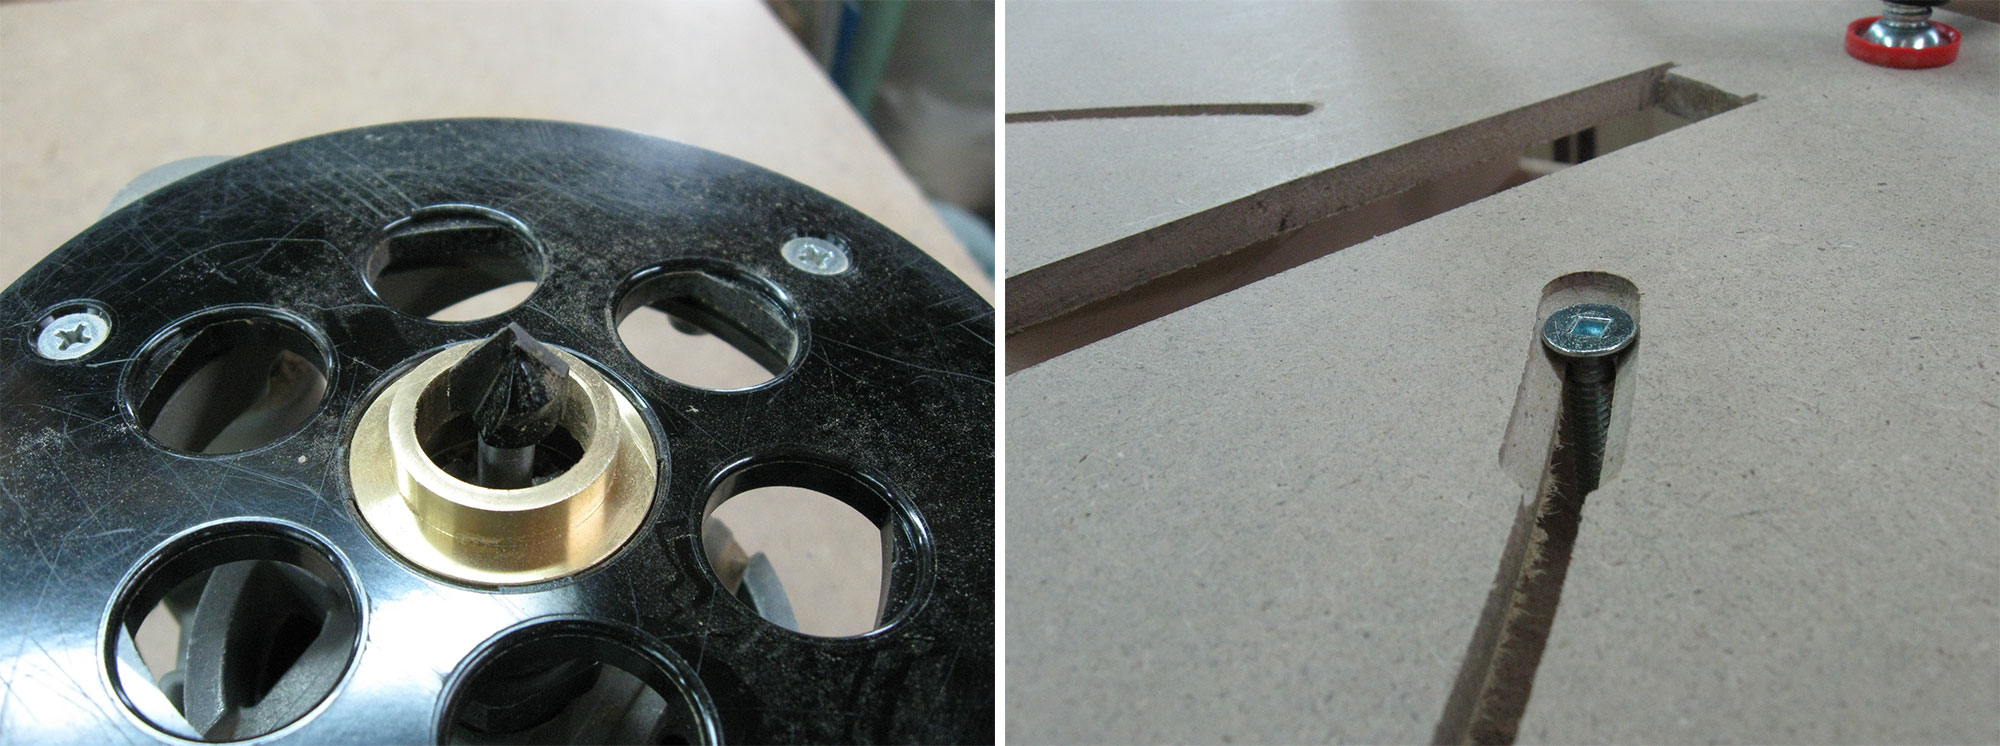 Left: V-groove bit installed in router. Right: Chamfered slot produced by V-bit.